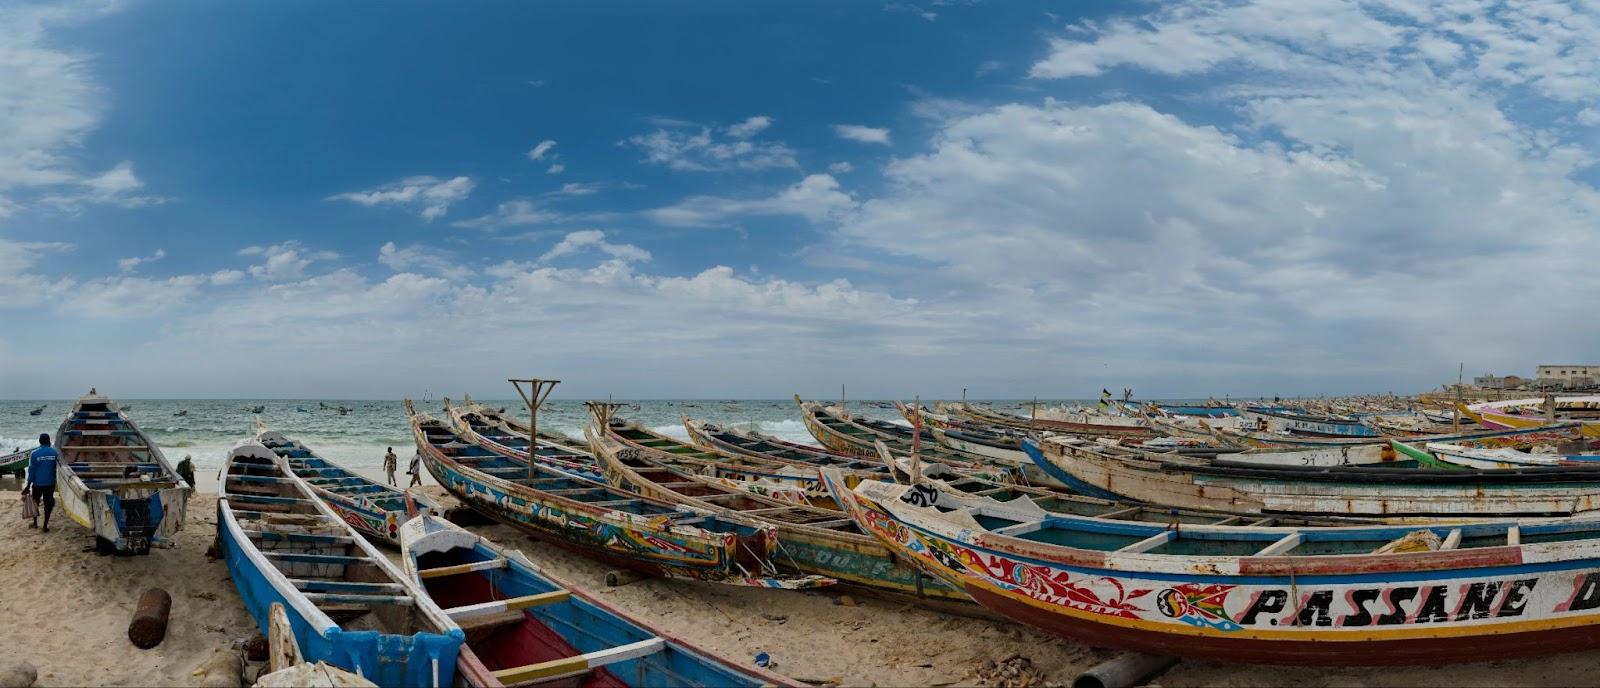 Nouakchott. Mauritania. Hundreds of huge painted wooden boats, on which local fishermen go to sea